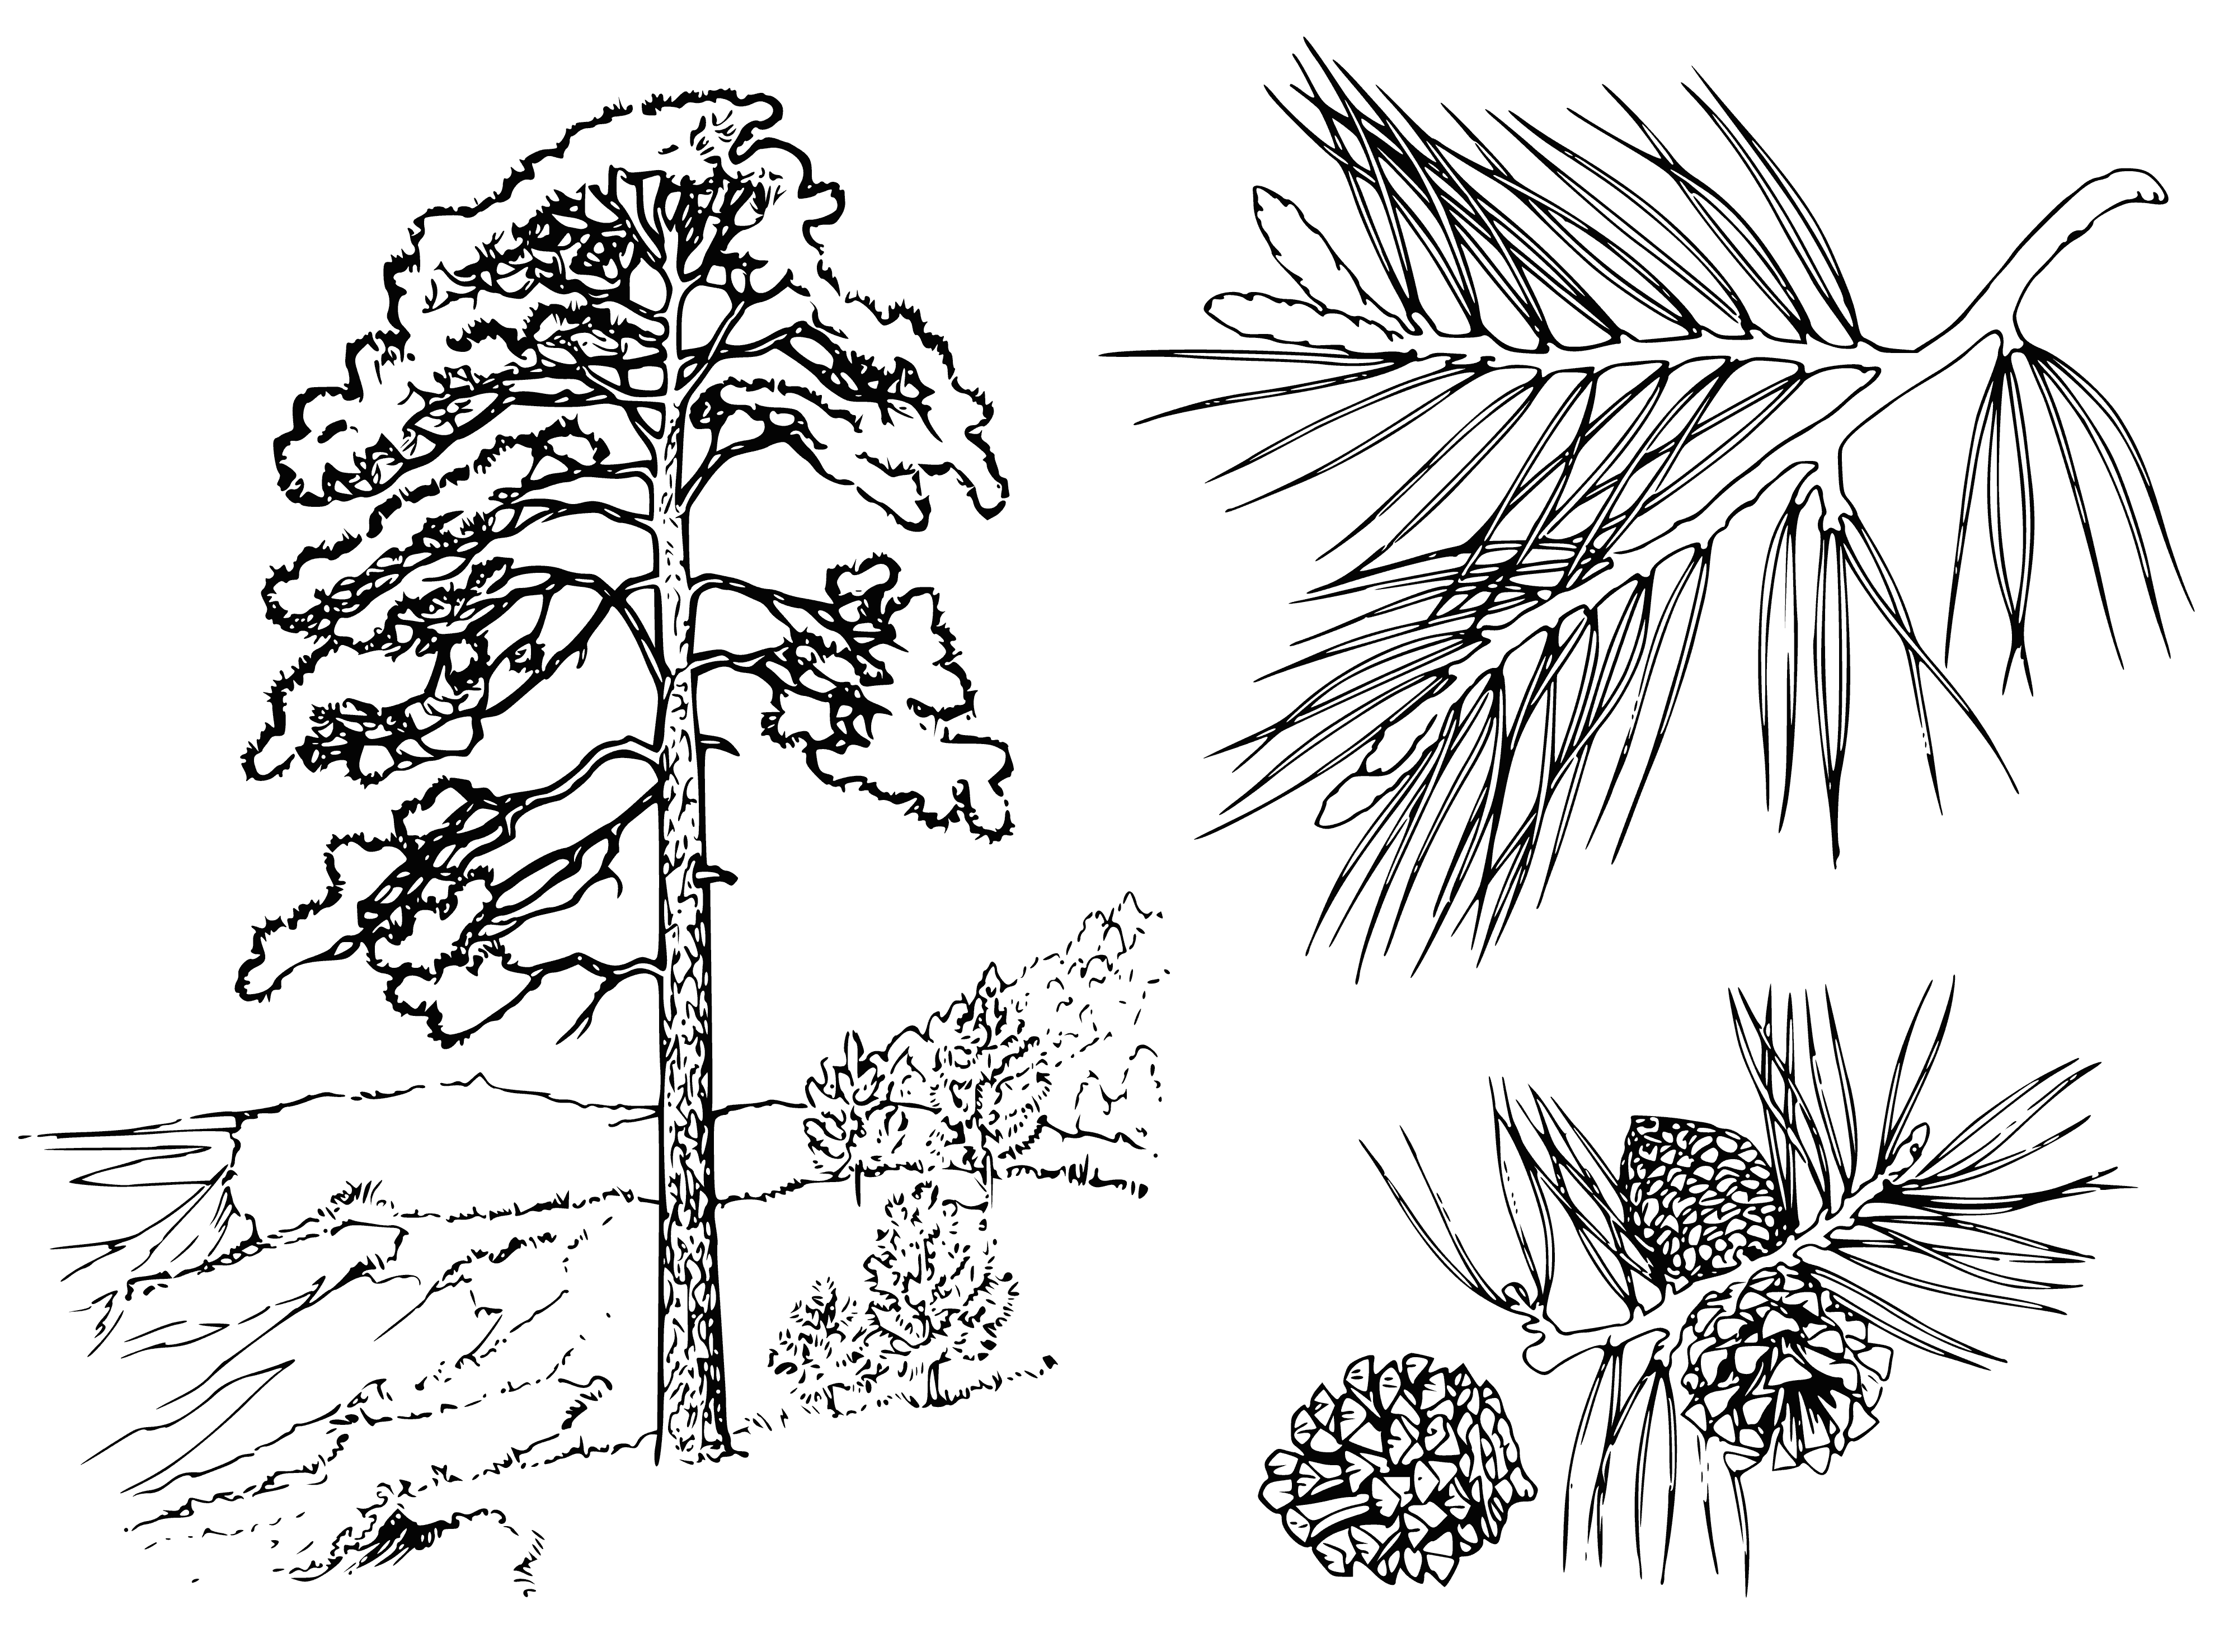 coloring page: Tall evergreen with pointy green needles & thick, scaly bark. Wide at bottom, snow on ground & surrounded by a field. #nature